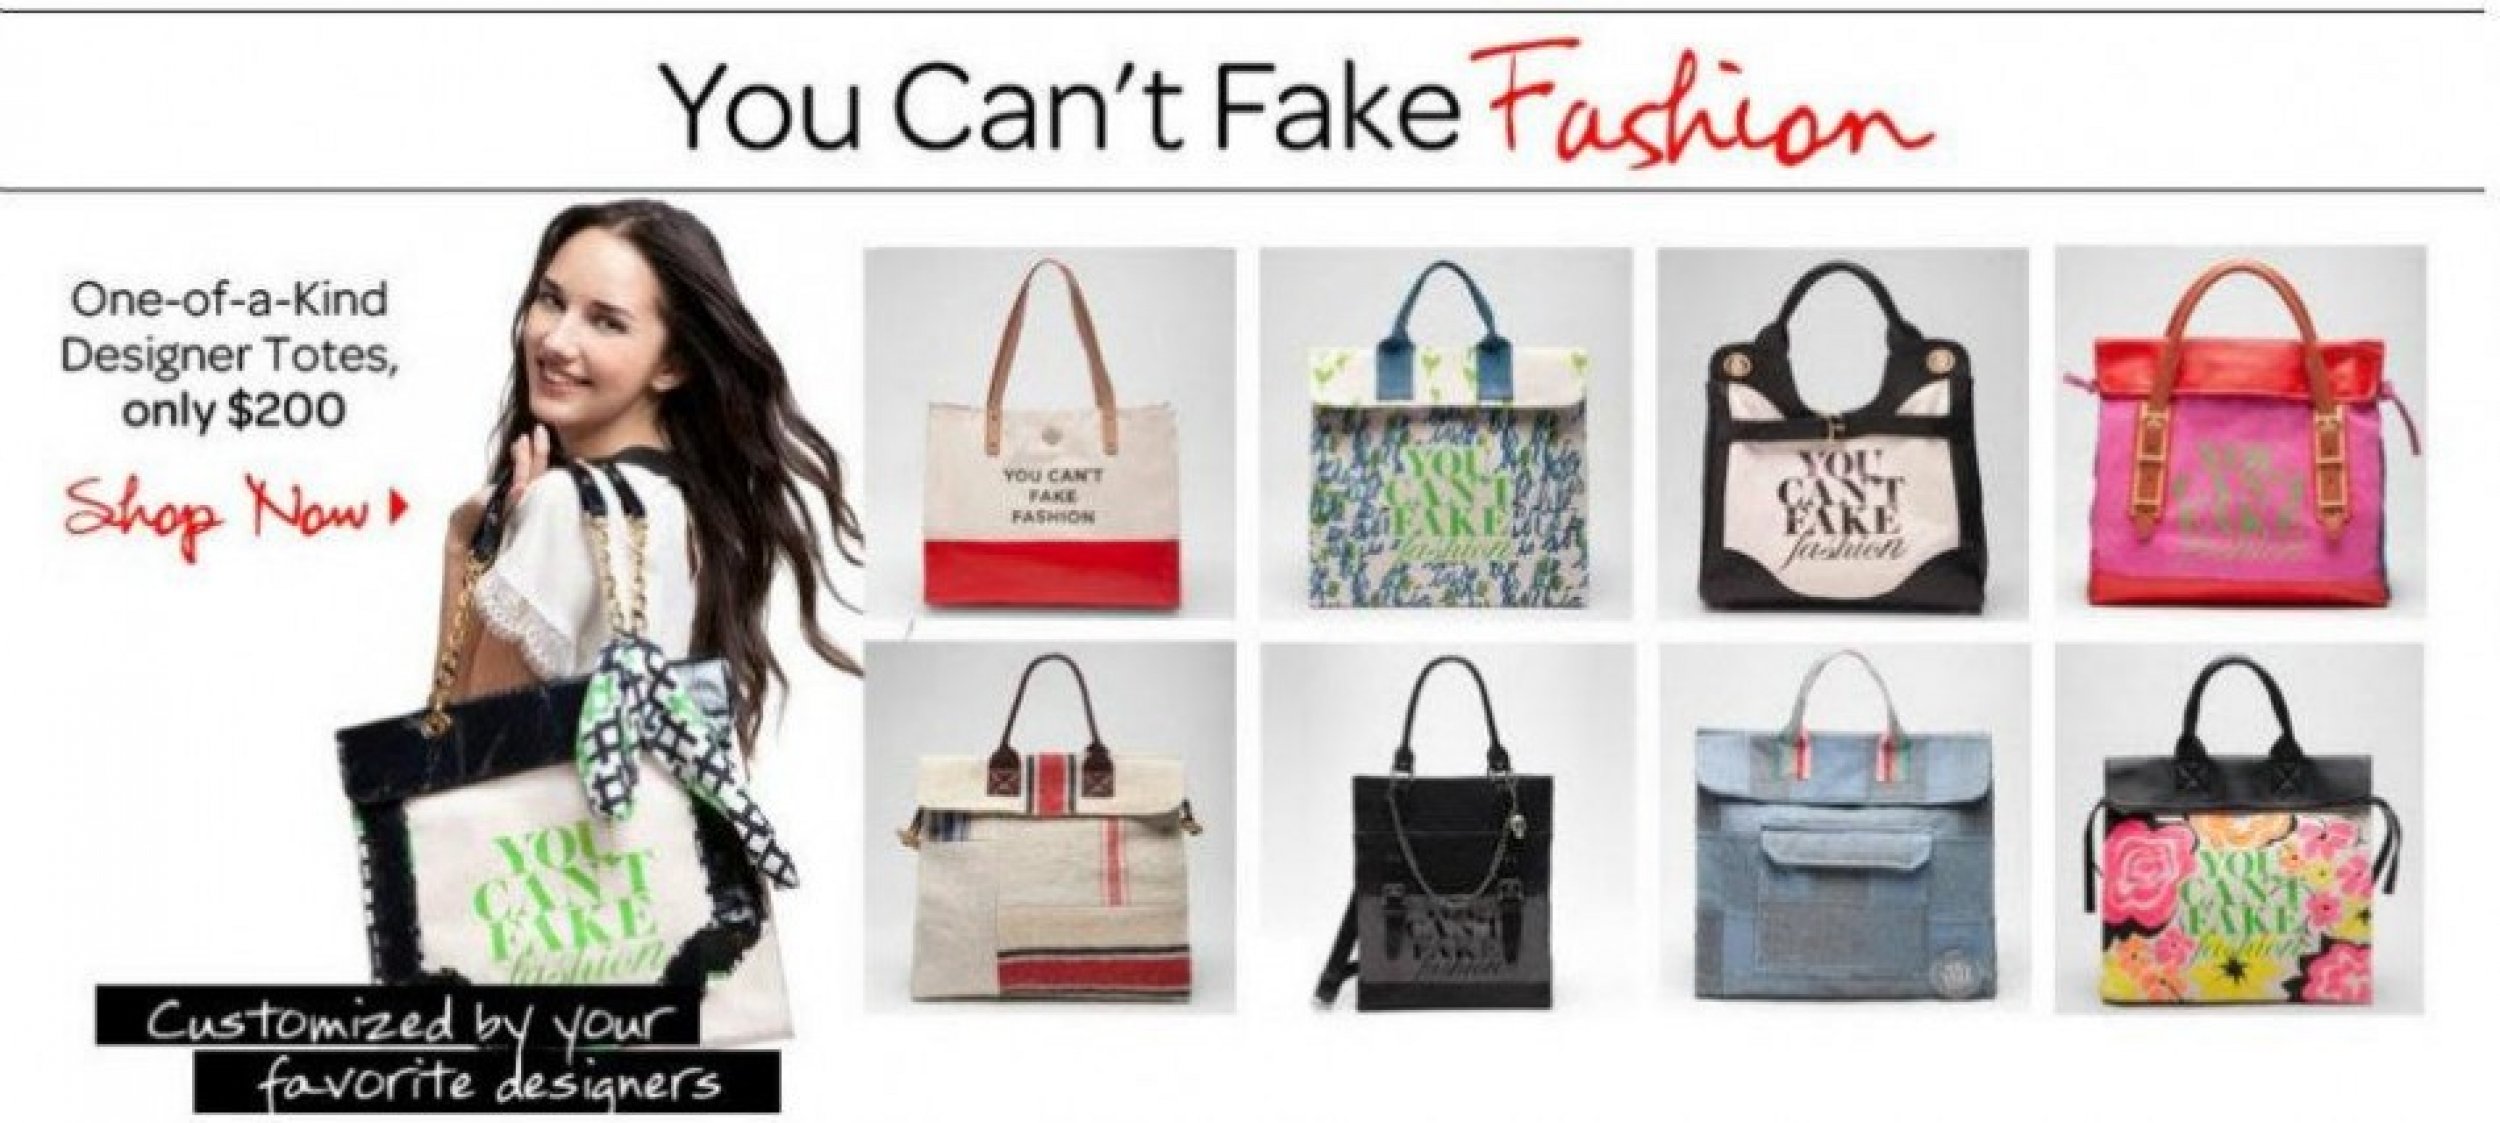 Leading Fashion Designs Join CFDA and eBays Fight against Counterfeits